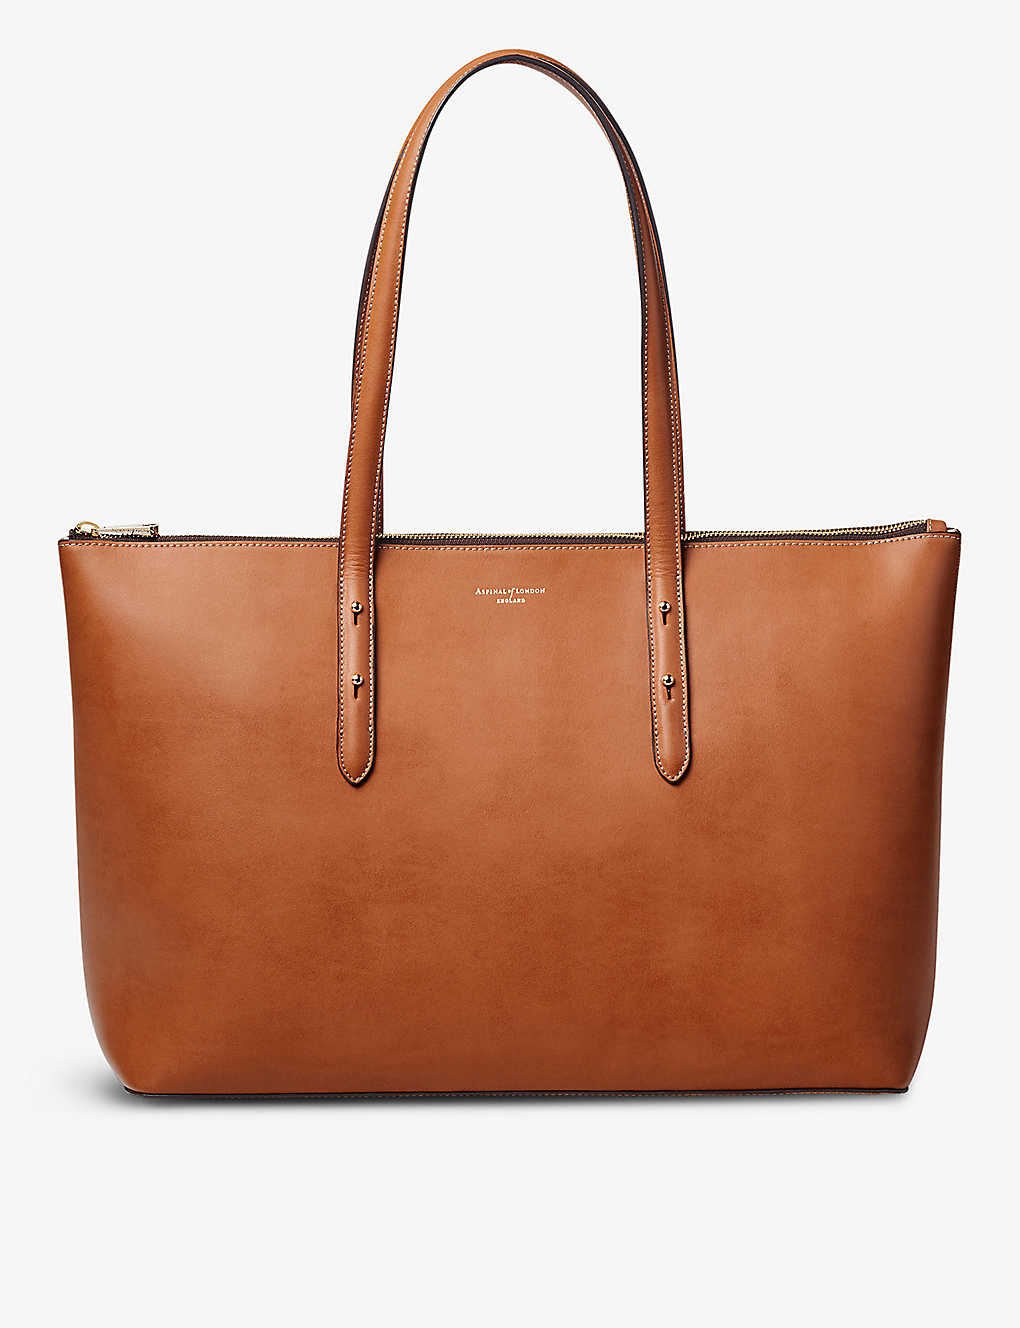 Aspinal Of London Womens Tan Regent Zipped Leather Tote Bag